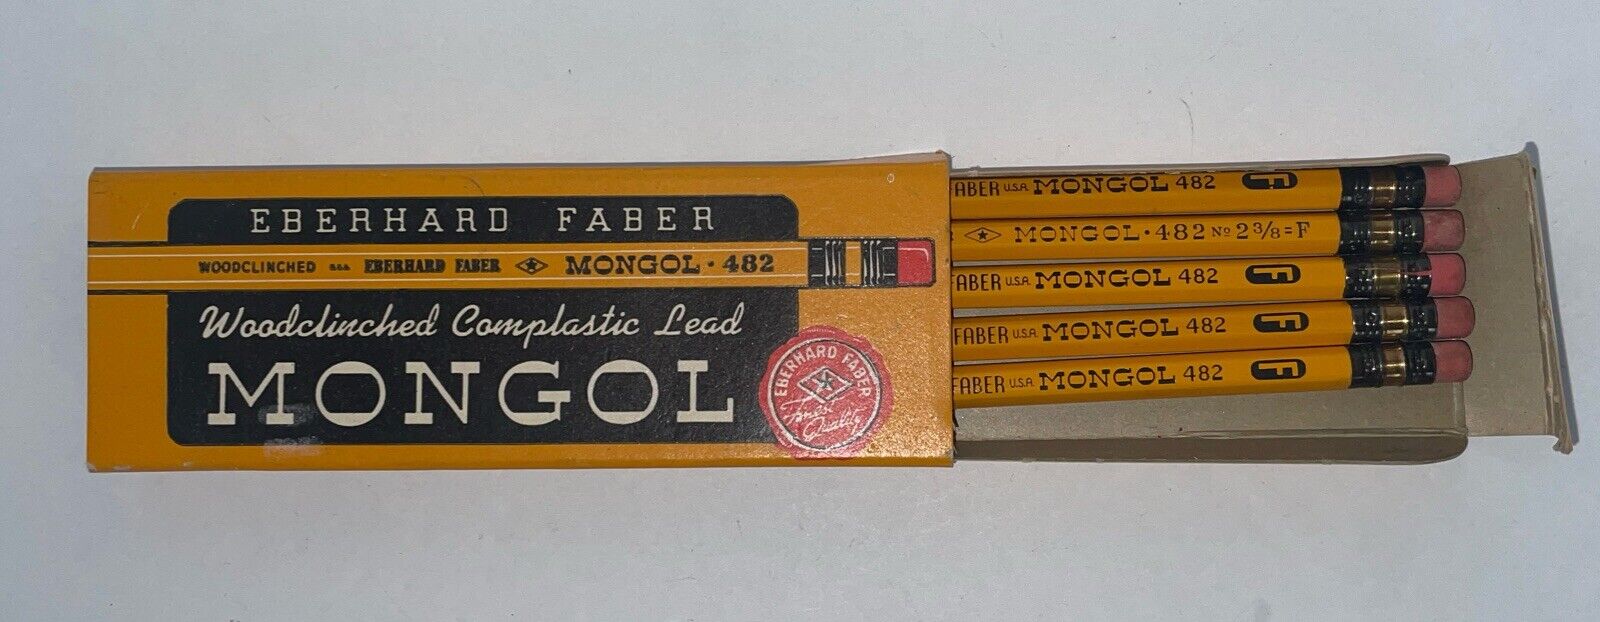 VTG 5 Eberhard Faber Pencils Woodclinched Complastic Lead Mongol 2-3/8 Firm 482